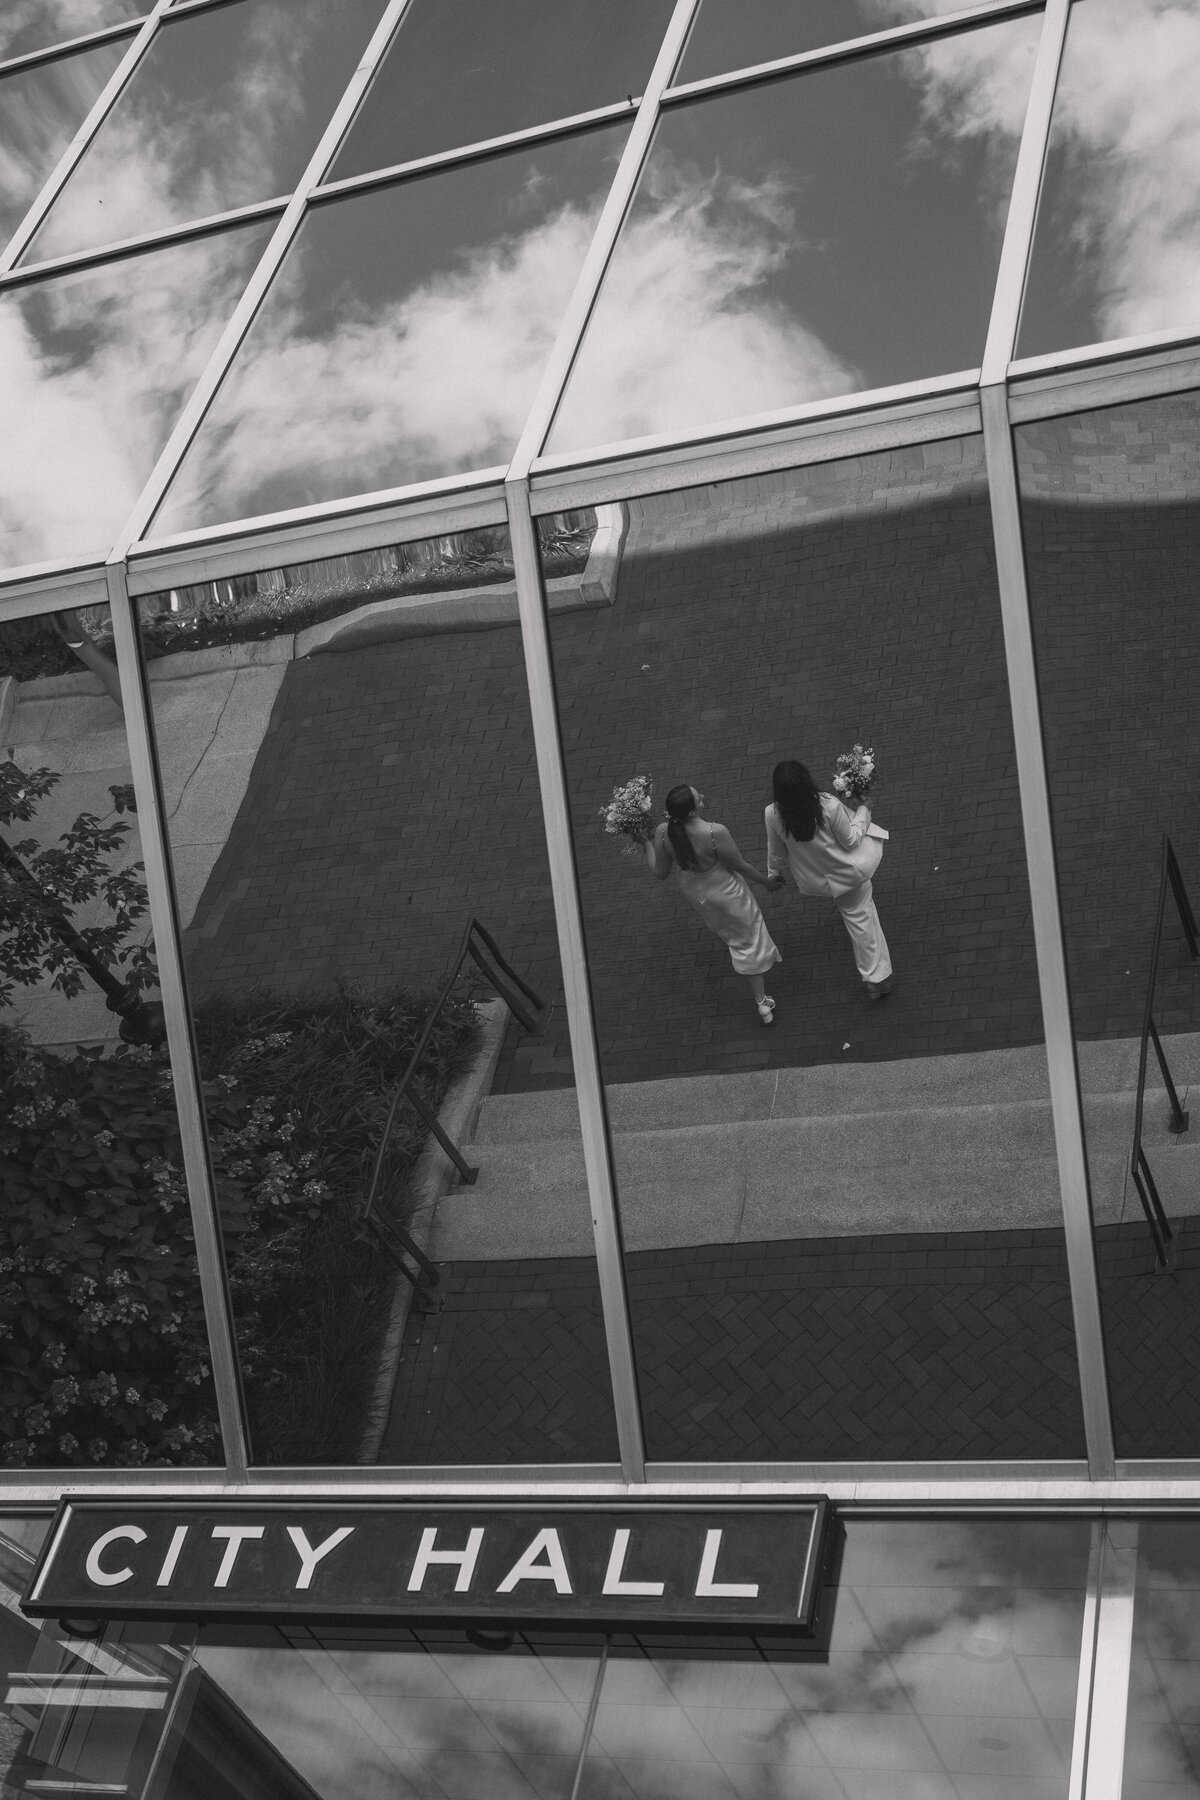 A black and white photograph capturing the reflection of a newlywed couple holding hands and walking away from City Hall. The couple, dressed elegantly, are seen from above through the reflective glass windows of the building. The sky and clouds are also reflected in the windows, adding a serene and symbolic touch to the moment. This image beautifully combines architectural elements with a candid, documentary-style wedding shot.